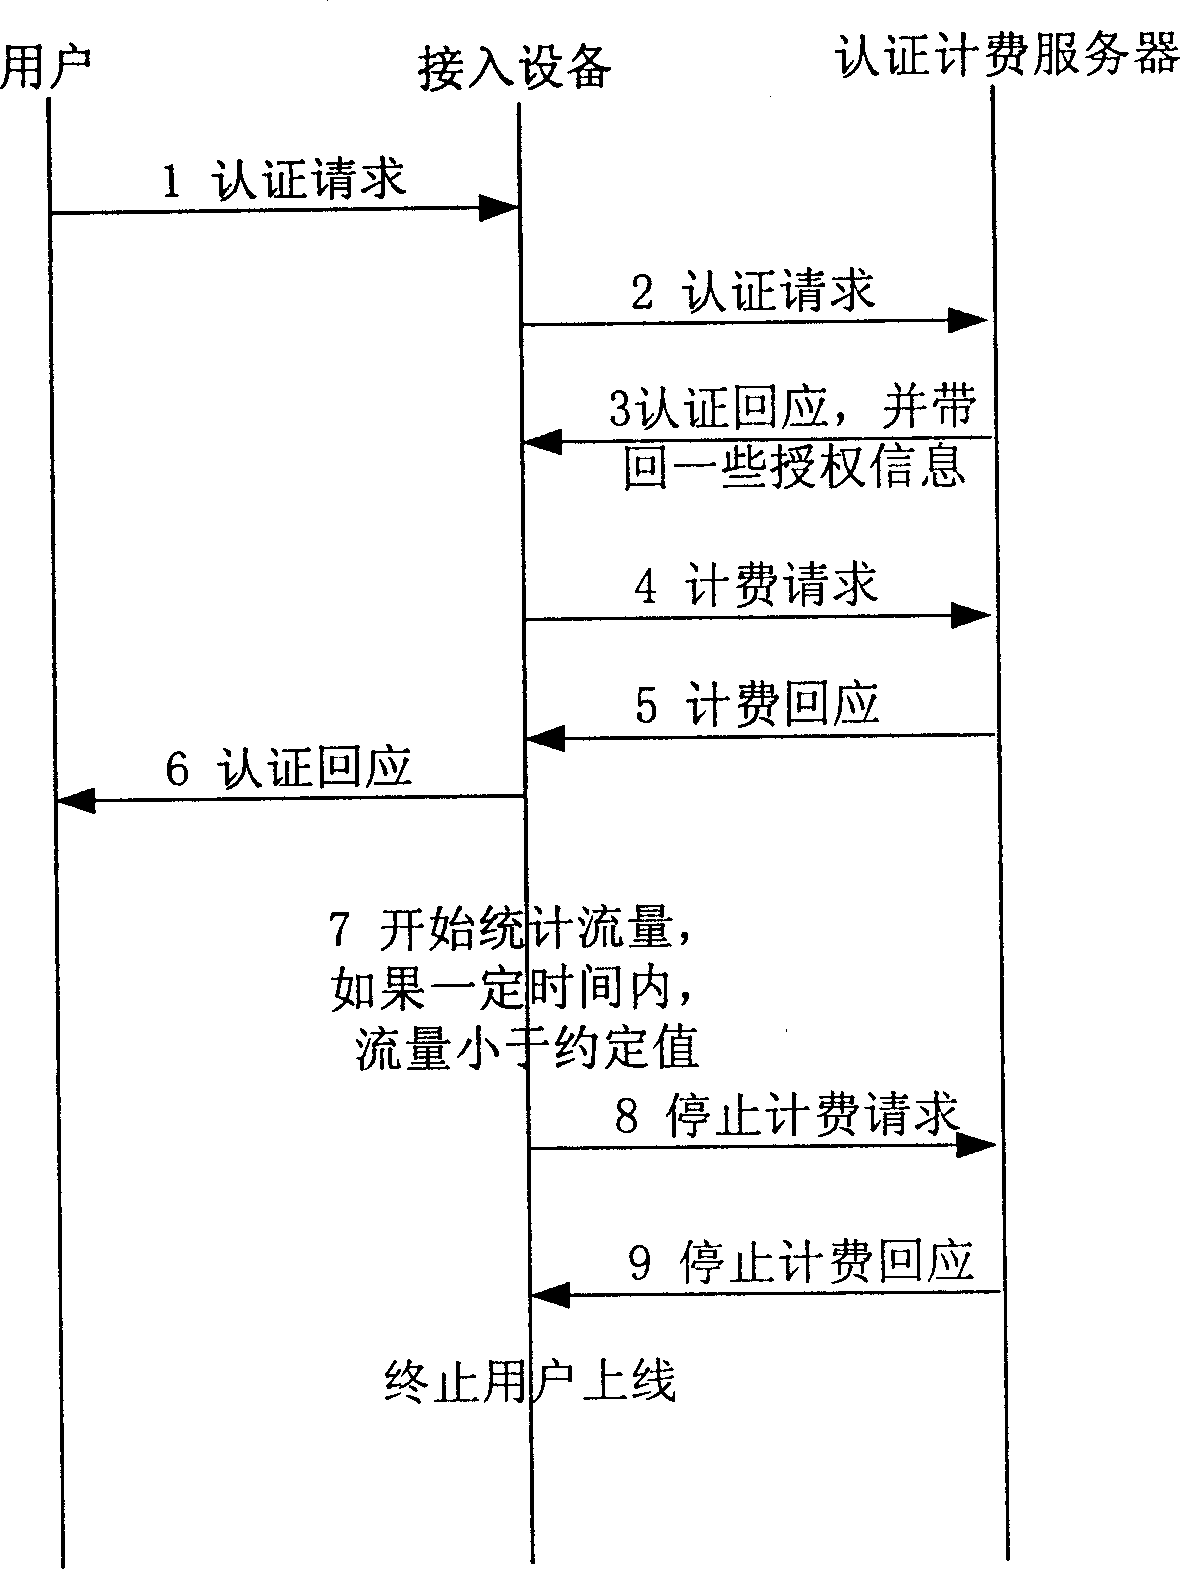 Control method for on-line network users